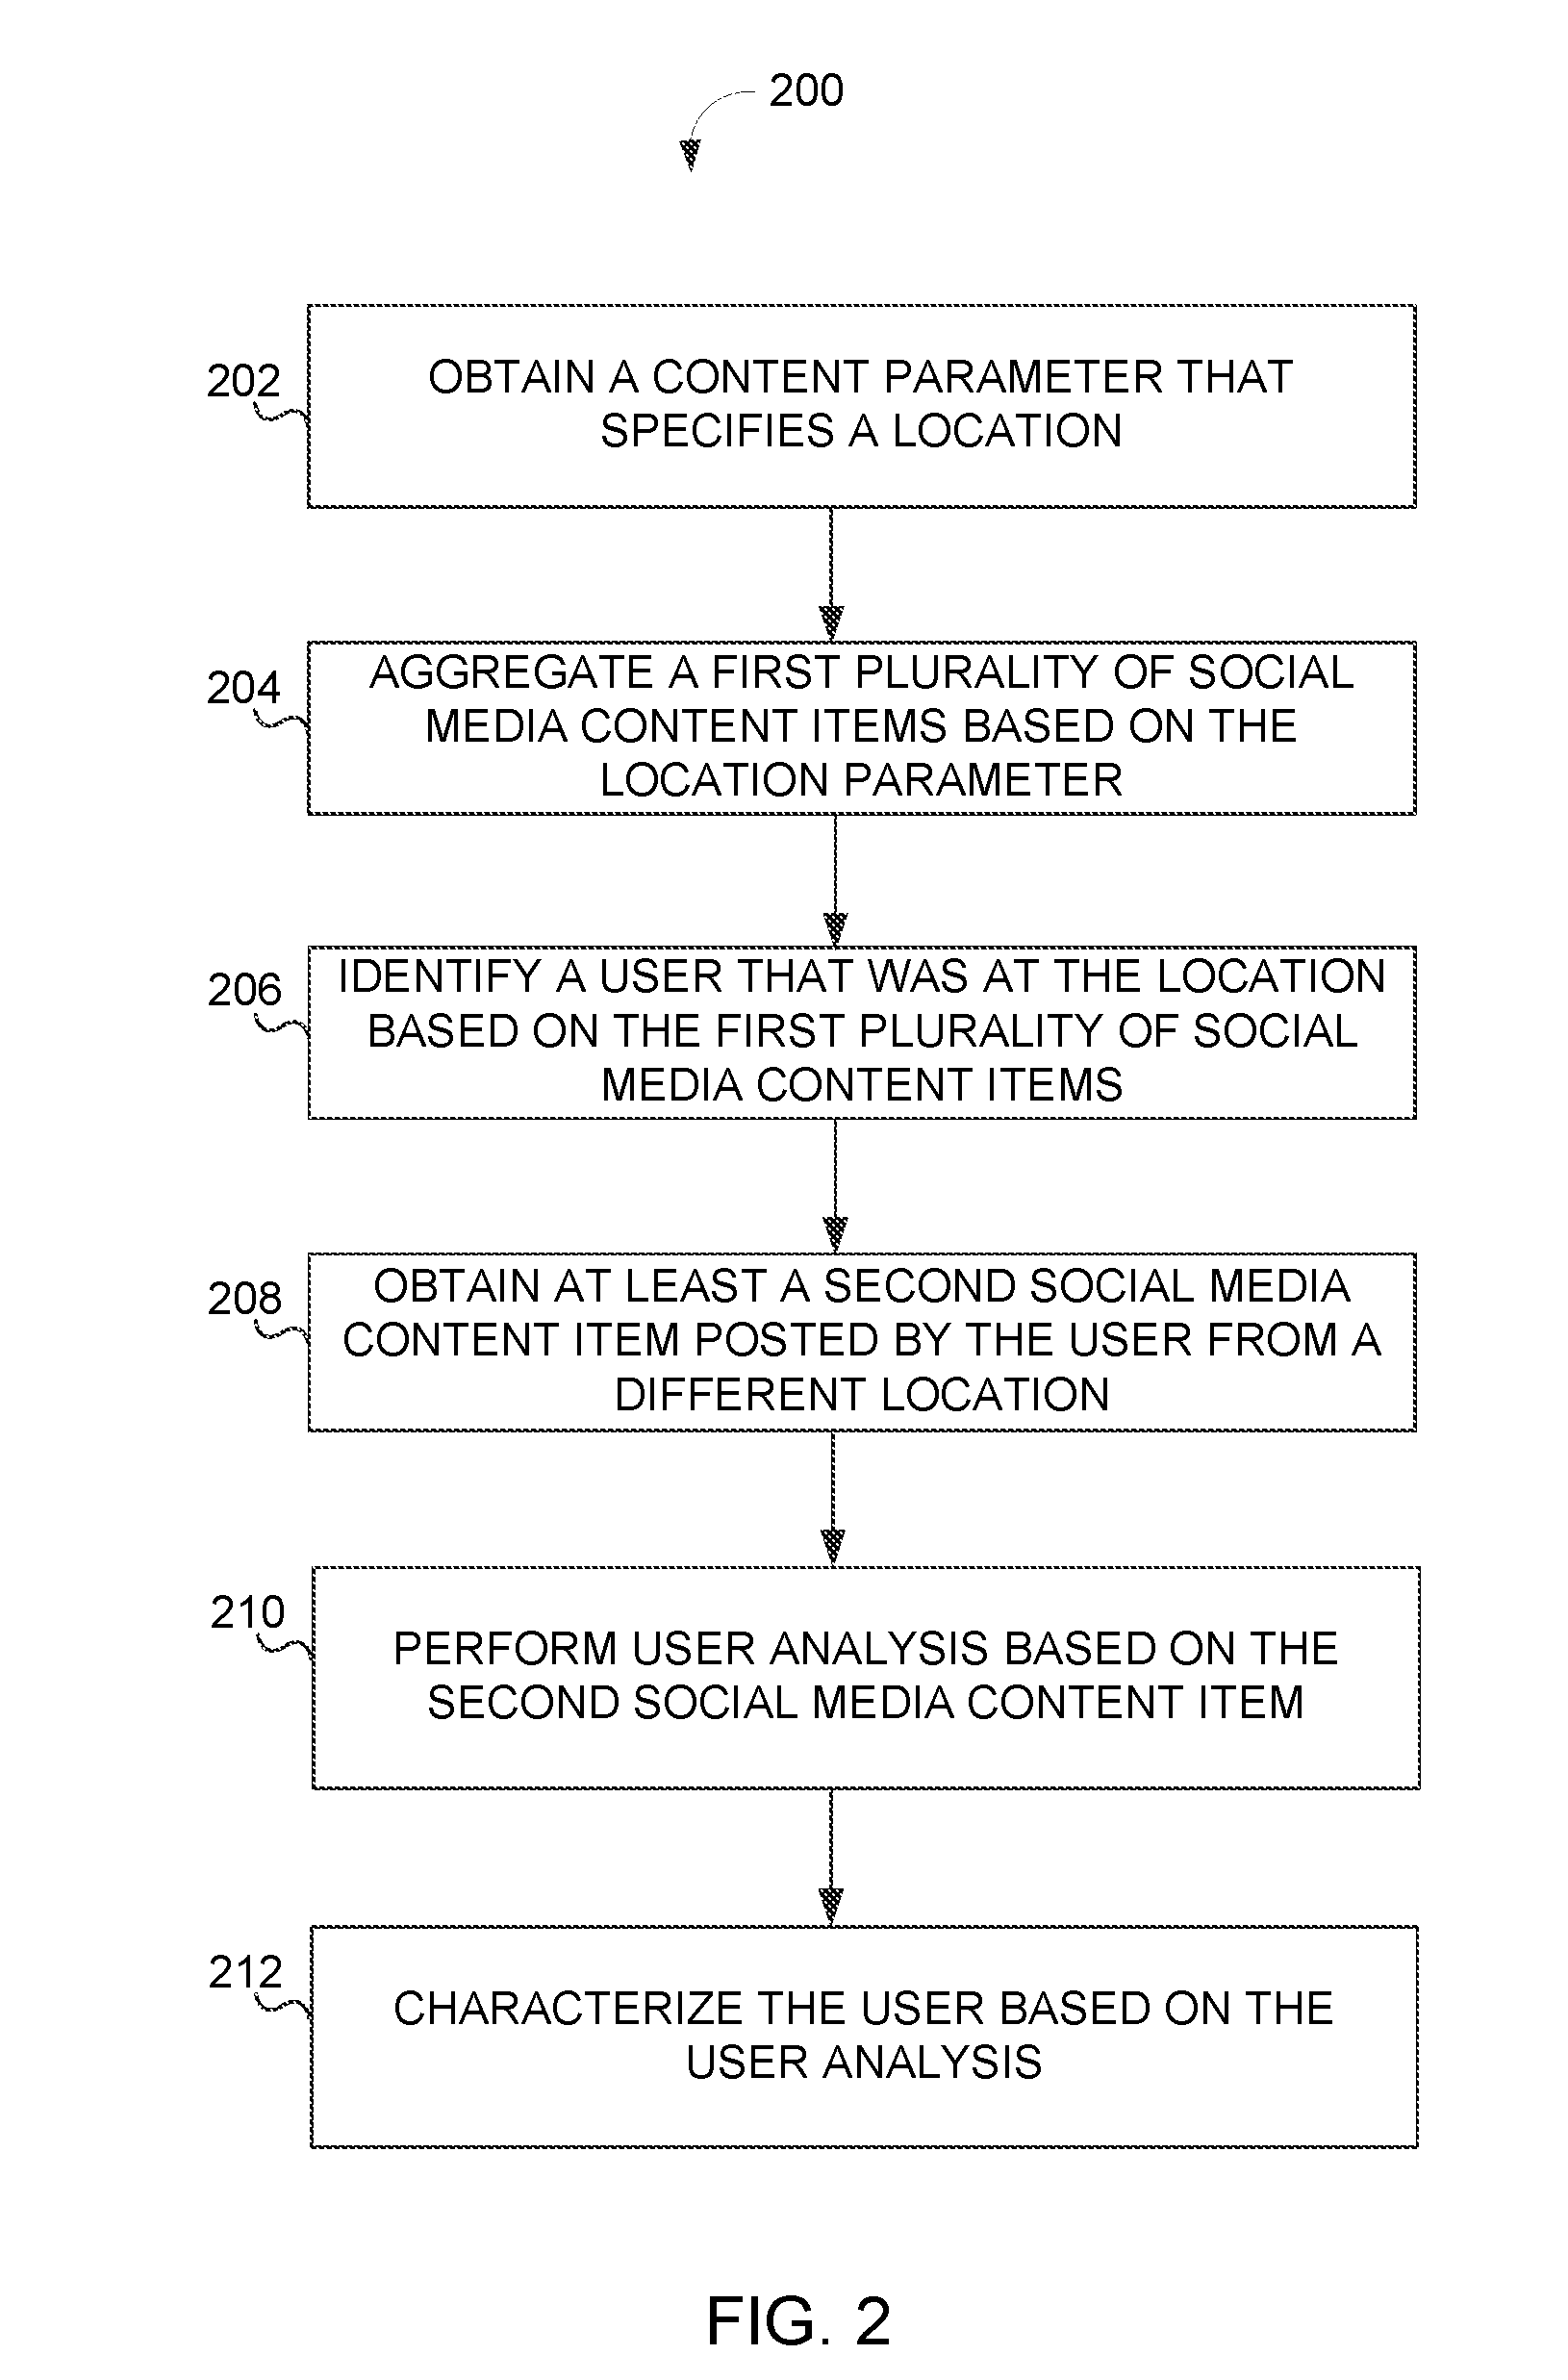 System and method for identifying influential social media and providing location-based alerts